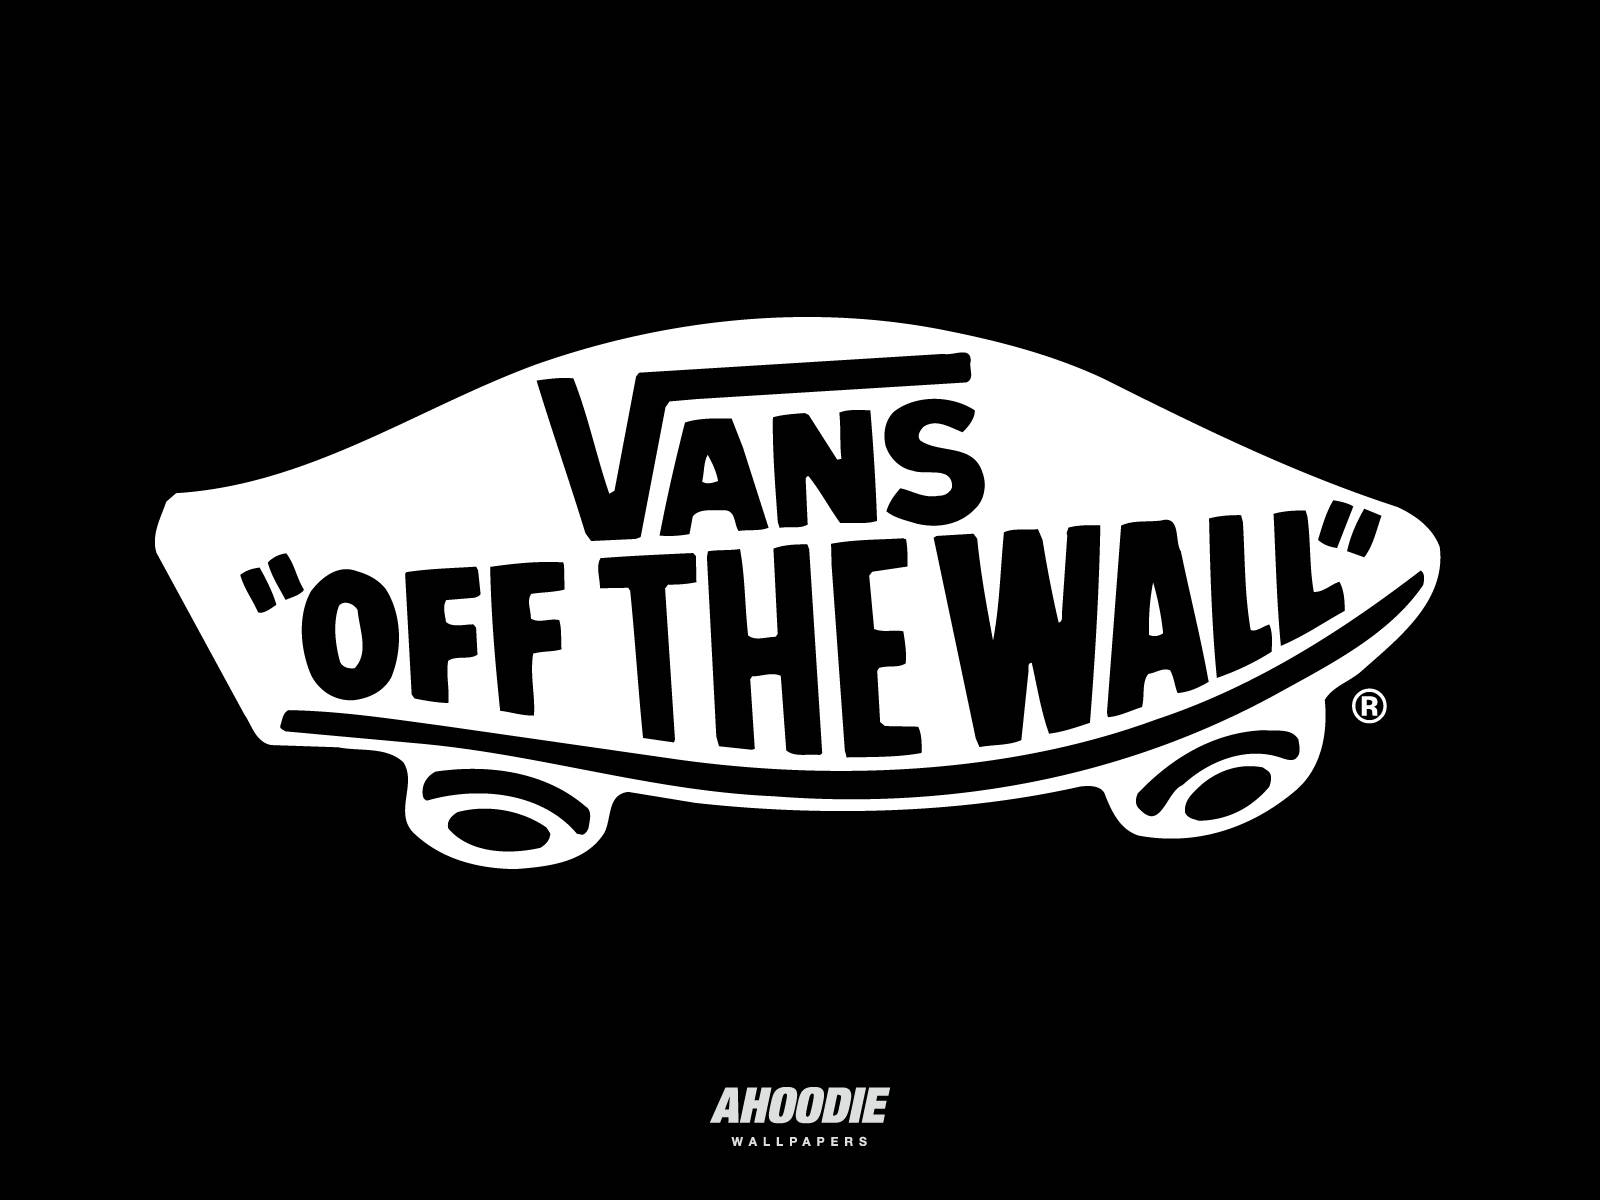 Off the Wall Vans Shoes Logo - Vans: Off The Wall Wallpapers - Wallpaper Cave